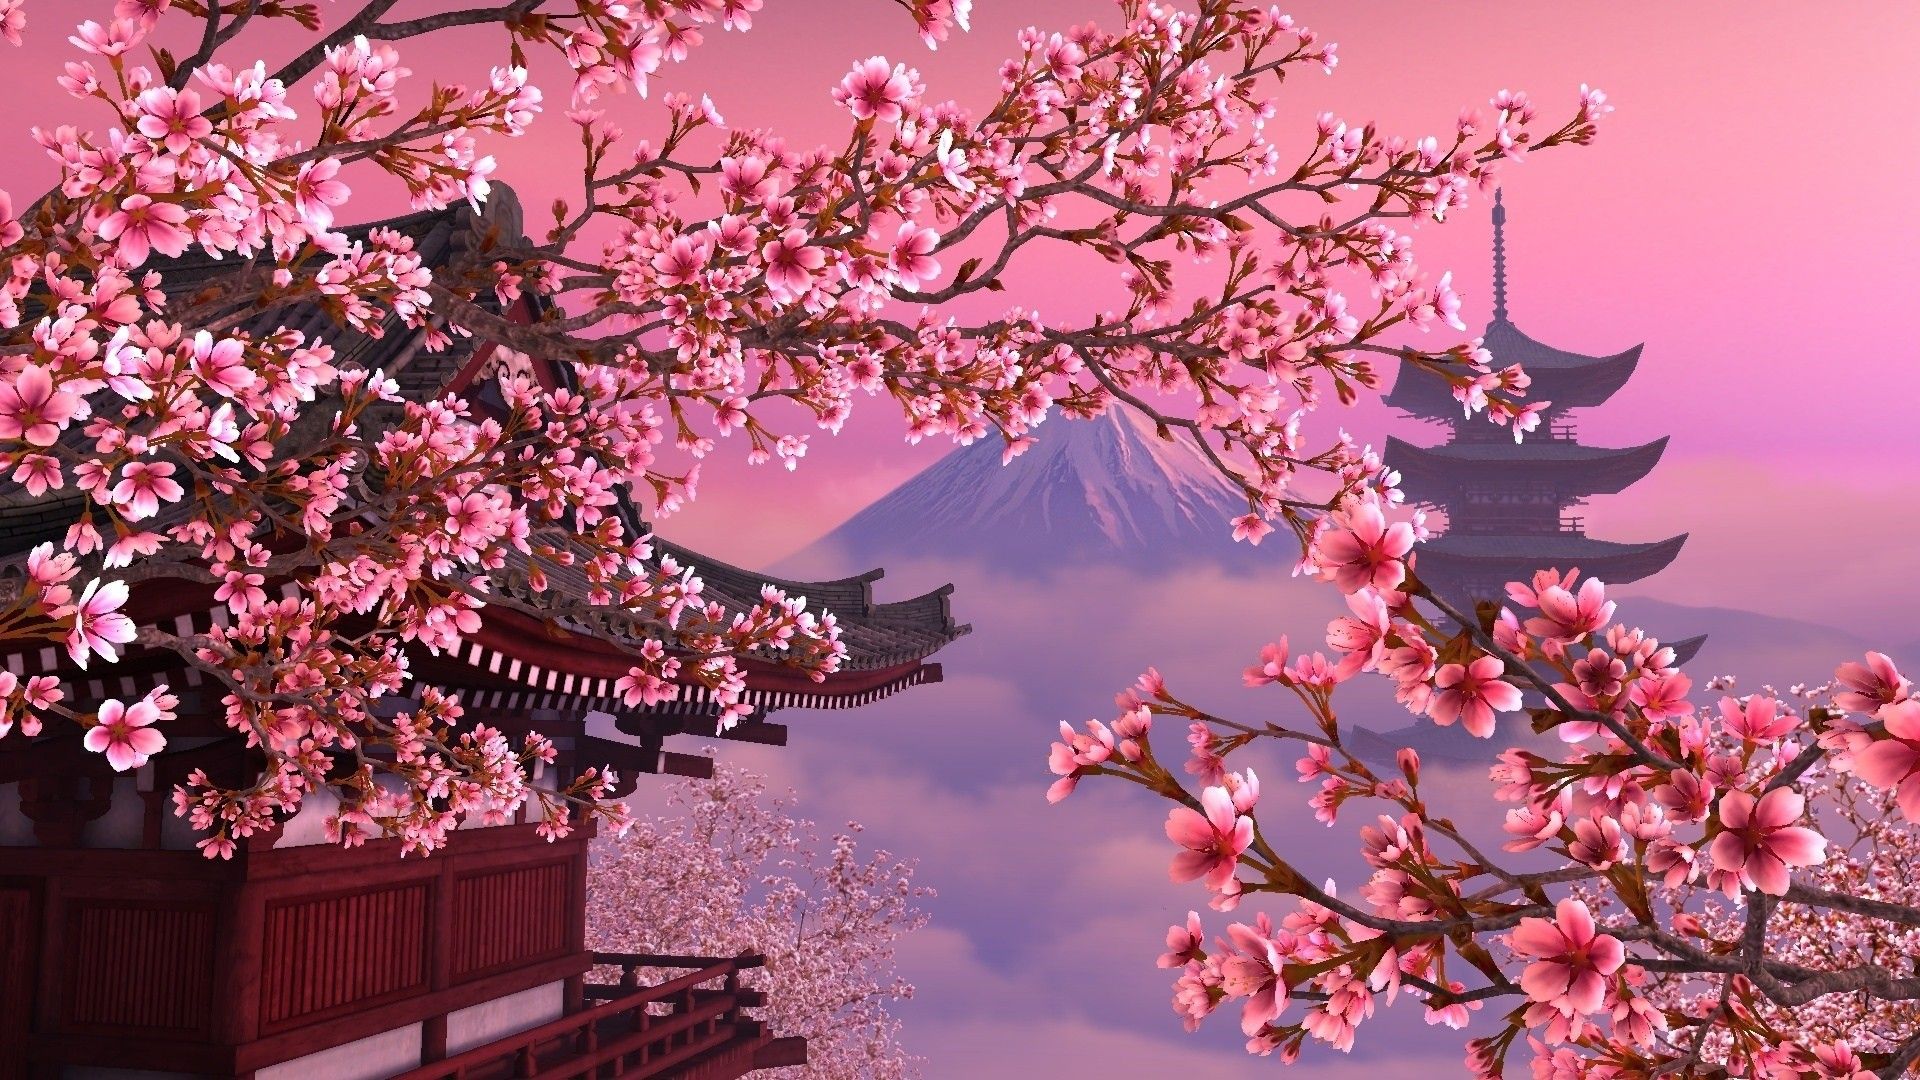 Cherry blossom anime aesthetic wallpapers